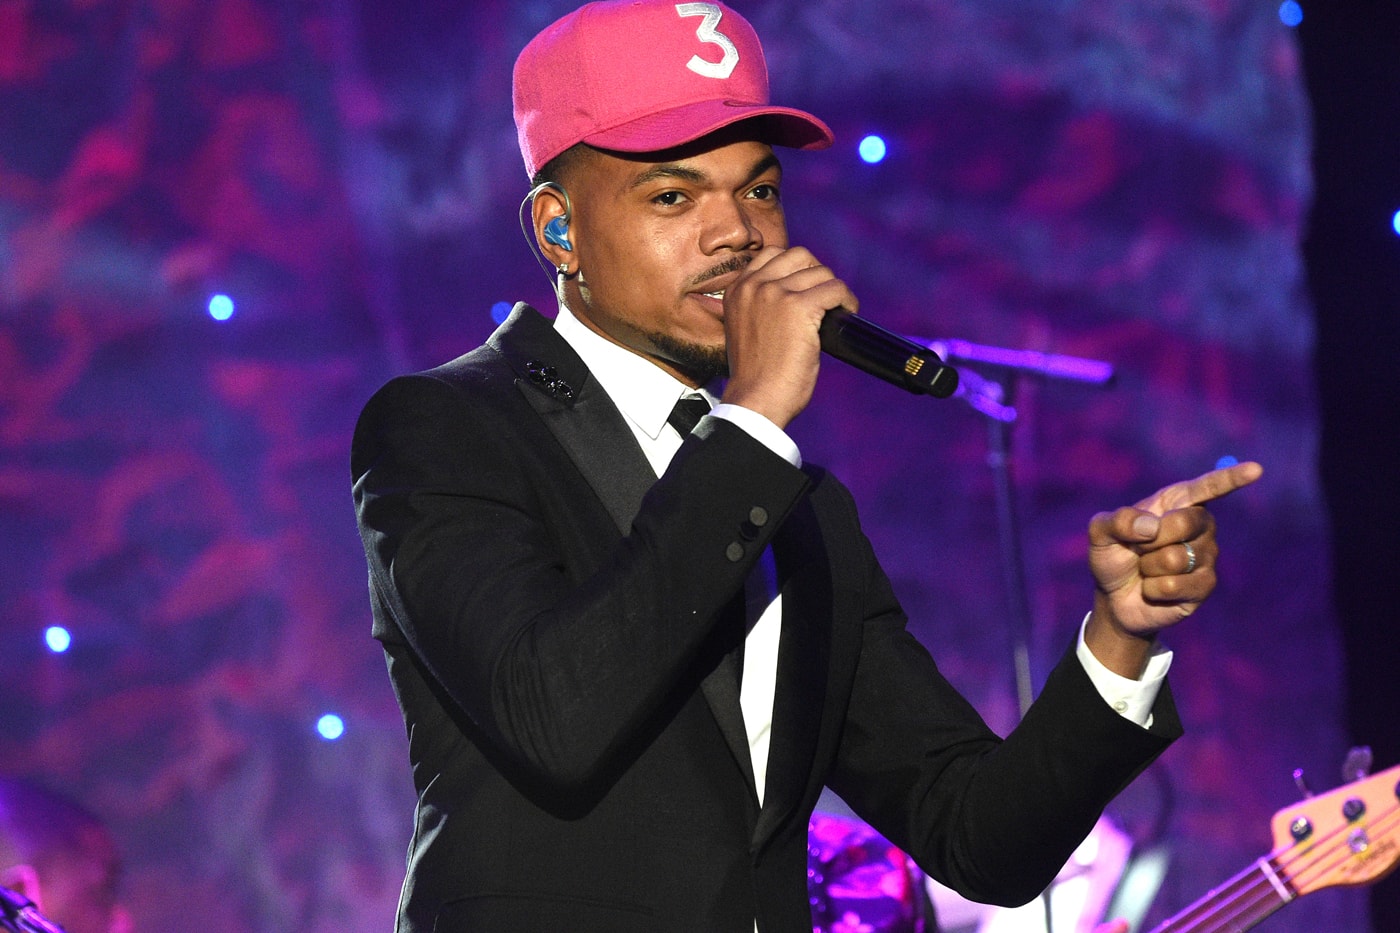 chance-the-rapper-skrillex-take-over-late-night-television